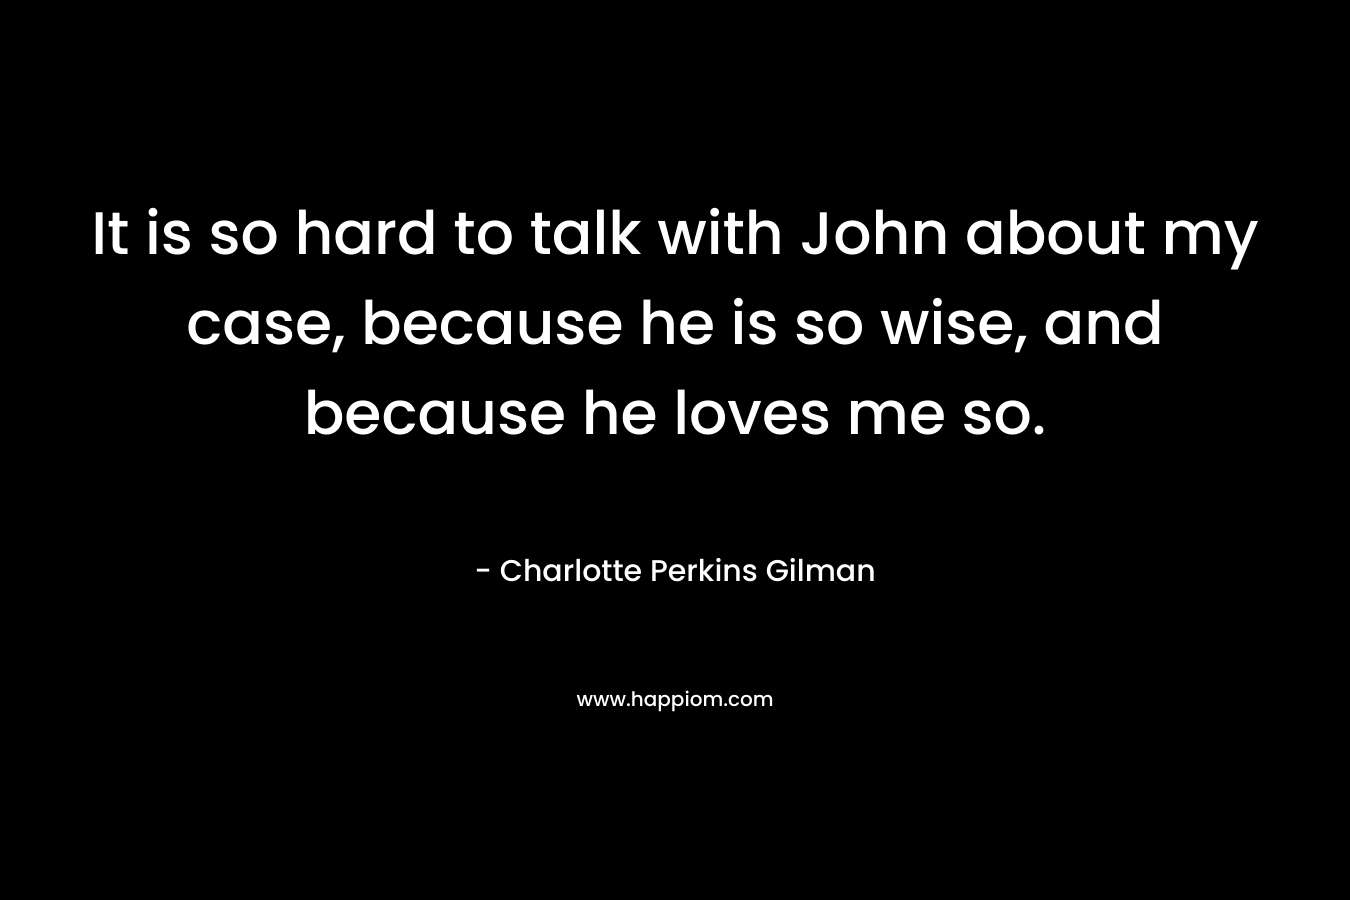 It is so hard to talk with John about my case, because he is so wise, and because he loves me so. – Charlotte Perkins Gilman